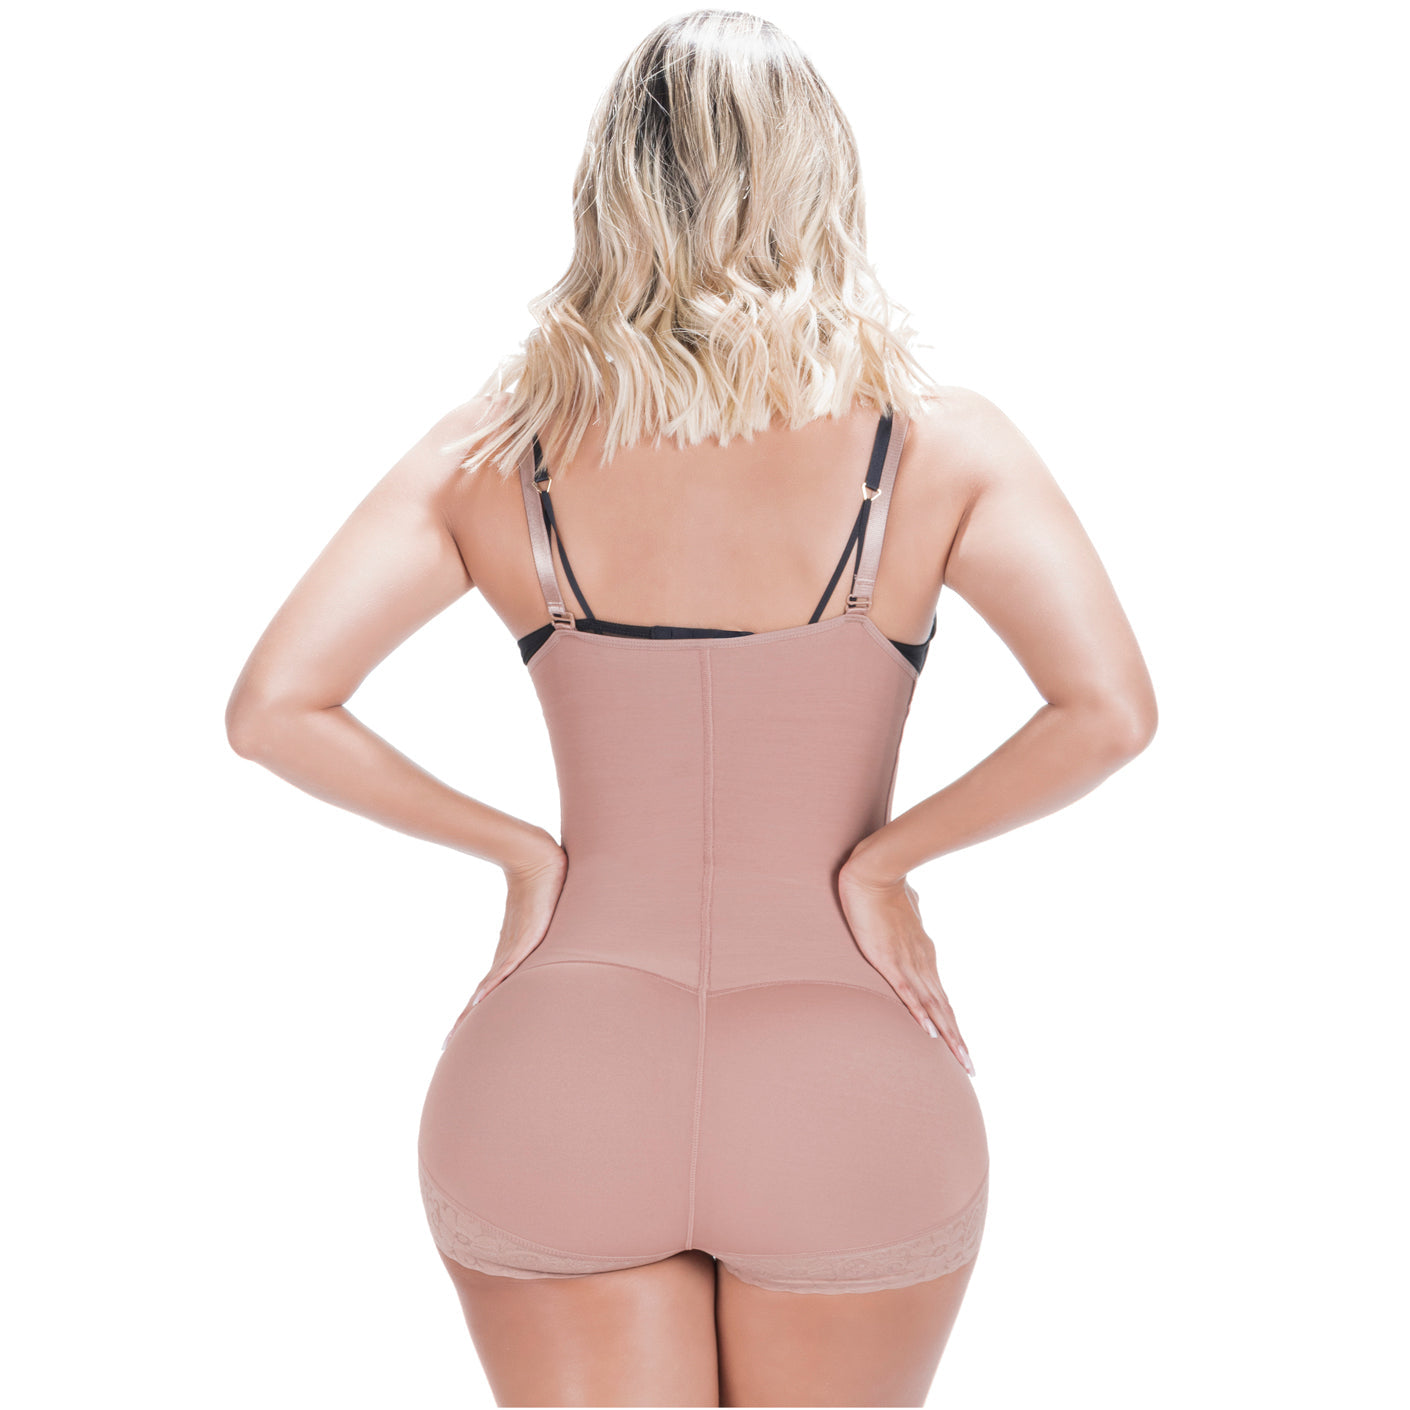 Sonryse TR71BF Tummy Control High Waisted Butt Lifter Firm